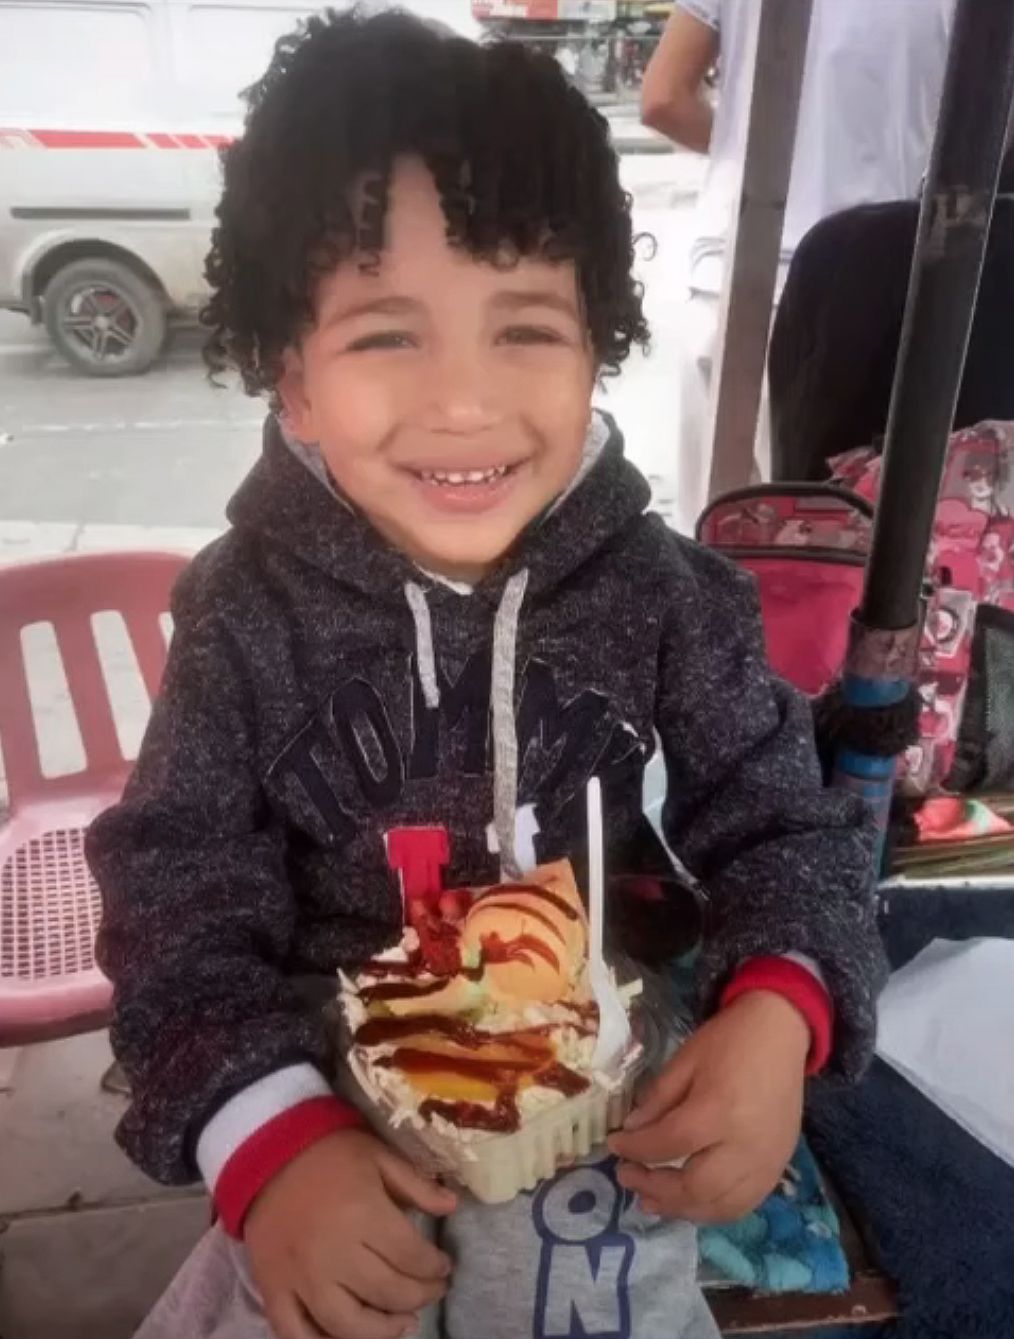 Jean Carlos Martinez Rivero, Boy, 5, Dies of Sepsis After Catching Covid and Strep A